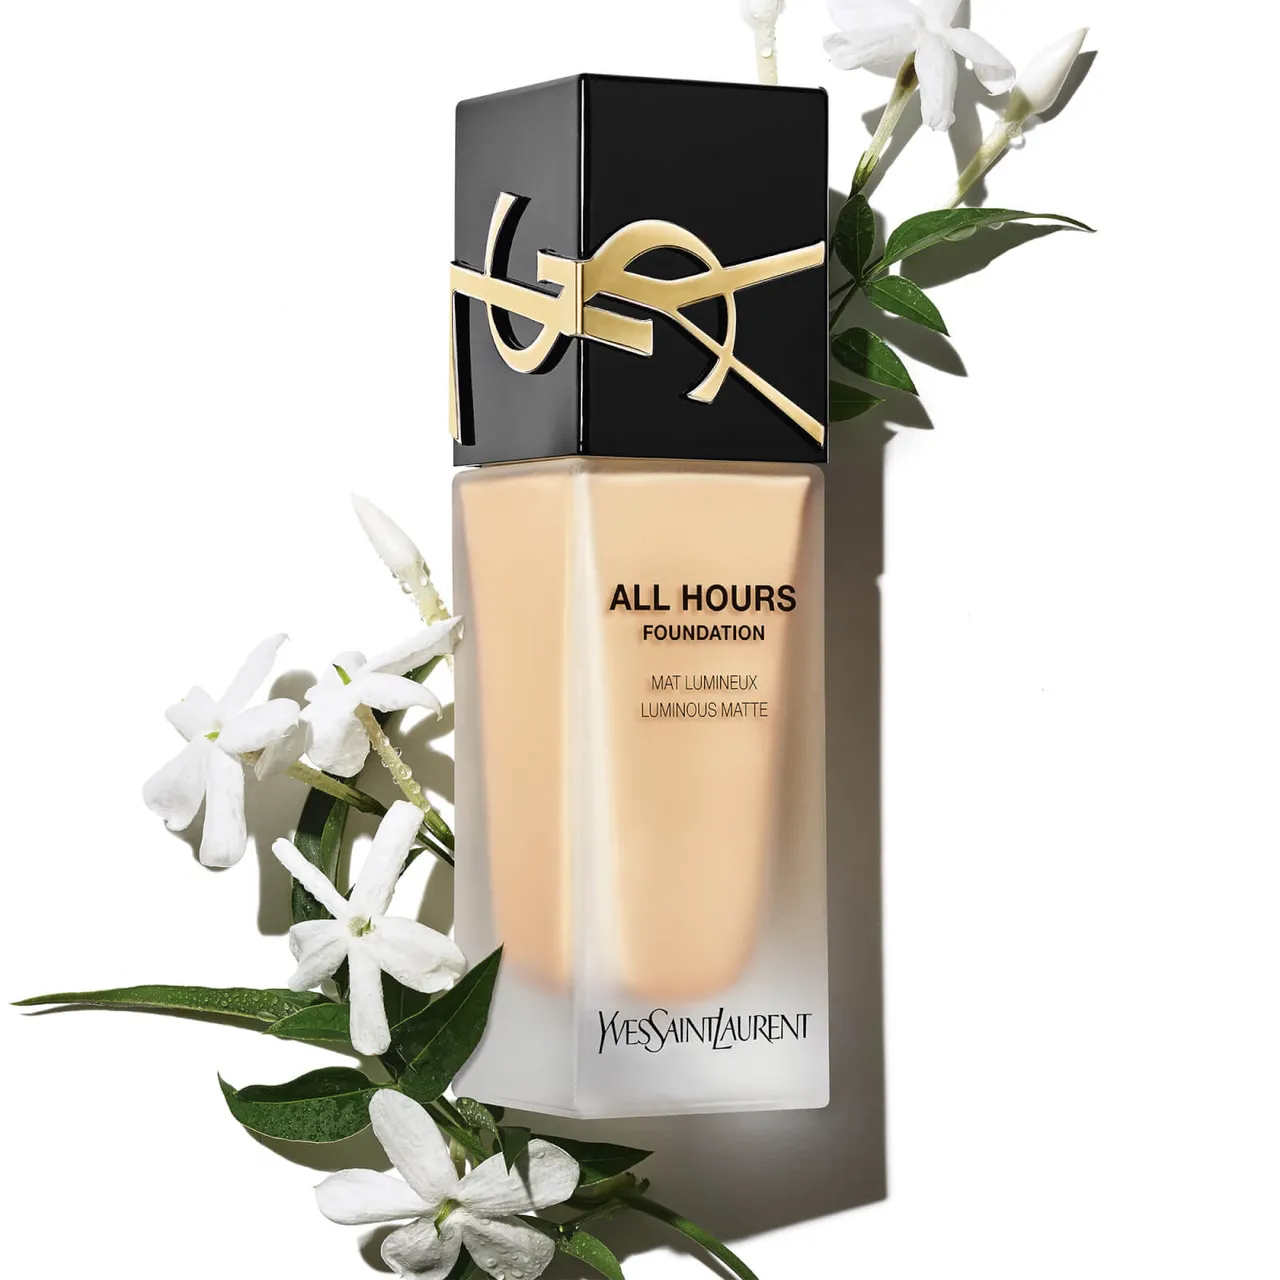 Yves Saint Laurent All Hours Luminous Matte Foundation with SPF 39 25ml (Various Shades) - LC2